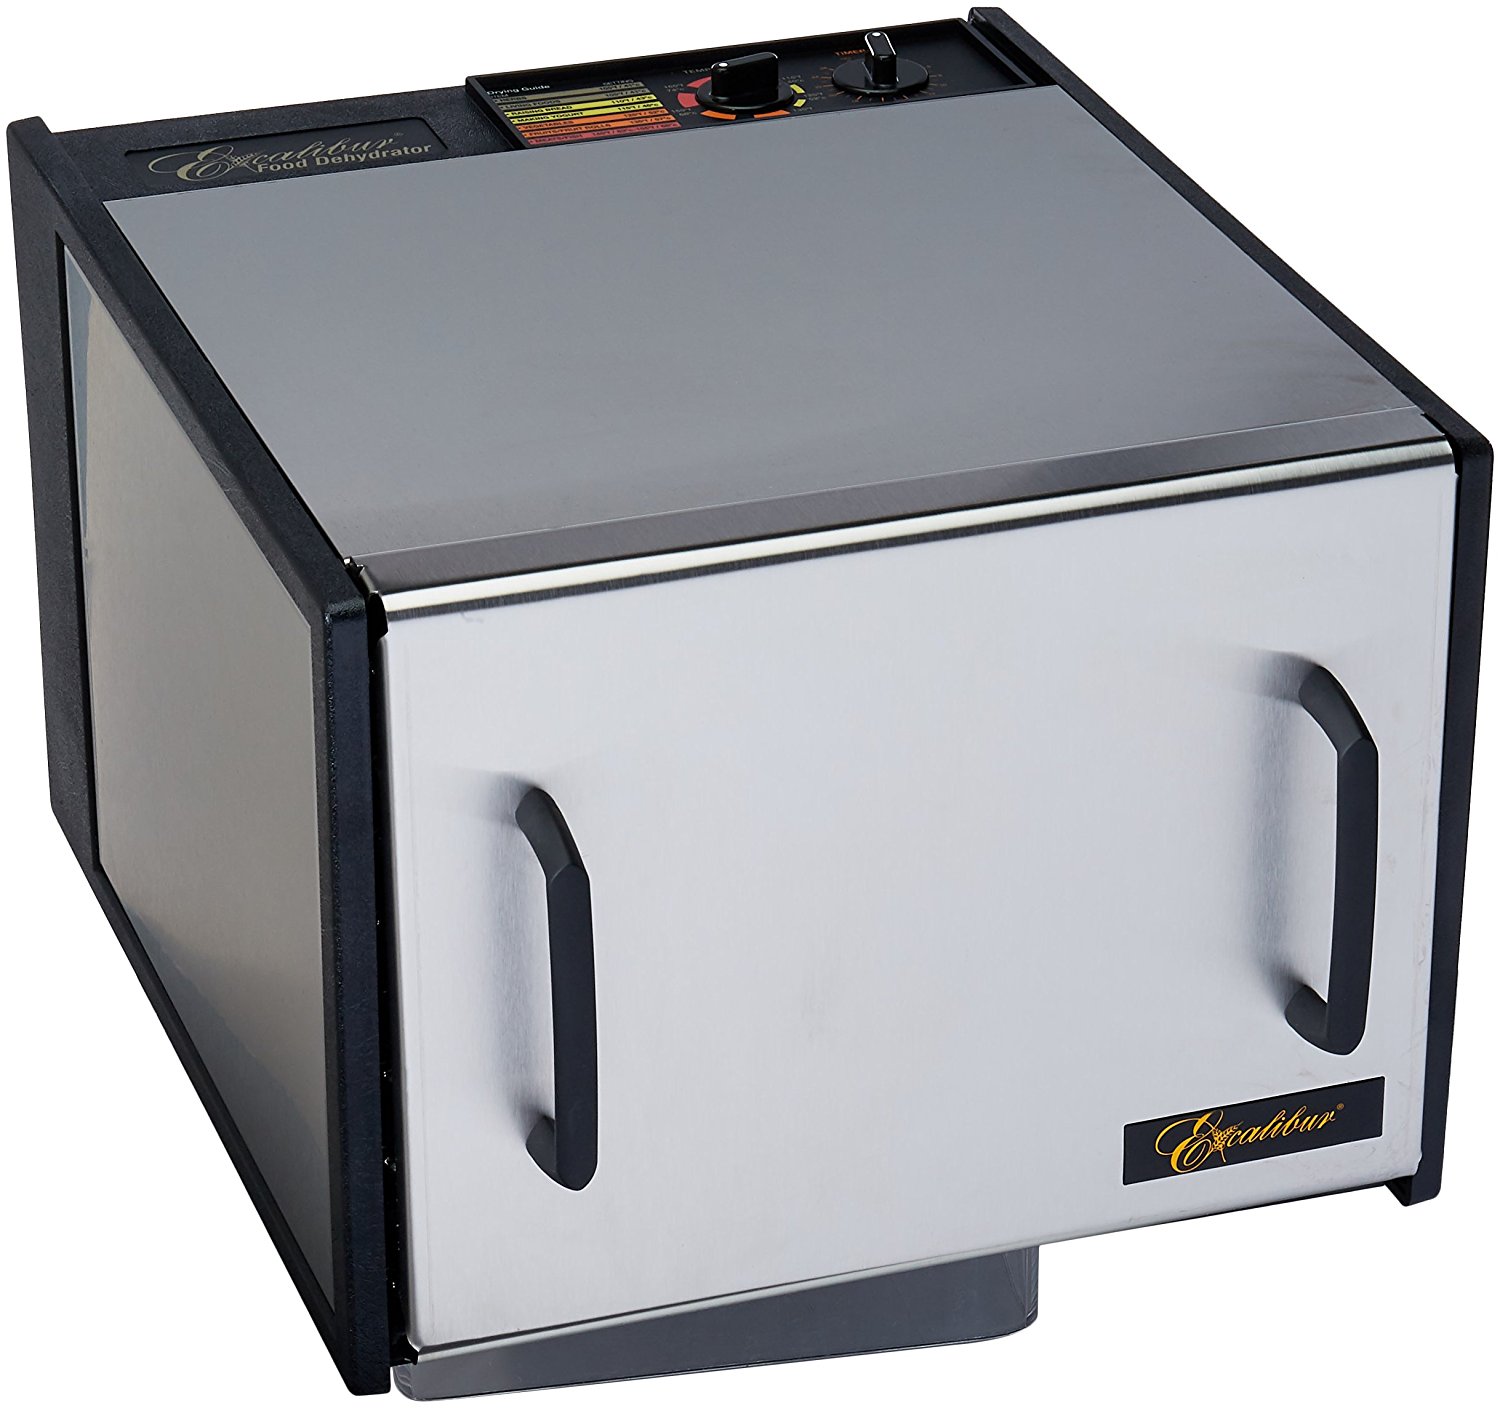 Excalibur 9-Tray Stainless Steel Dehydrator w/Stainless Steel Trays and Door Model D900SHD